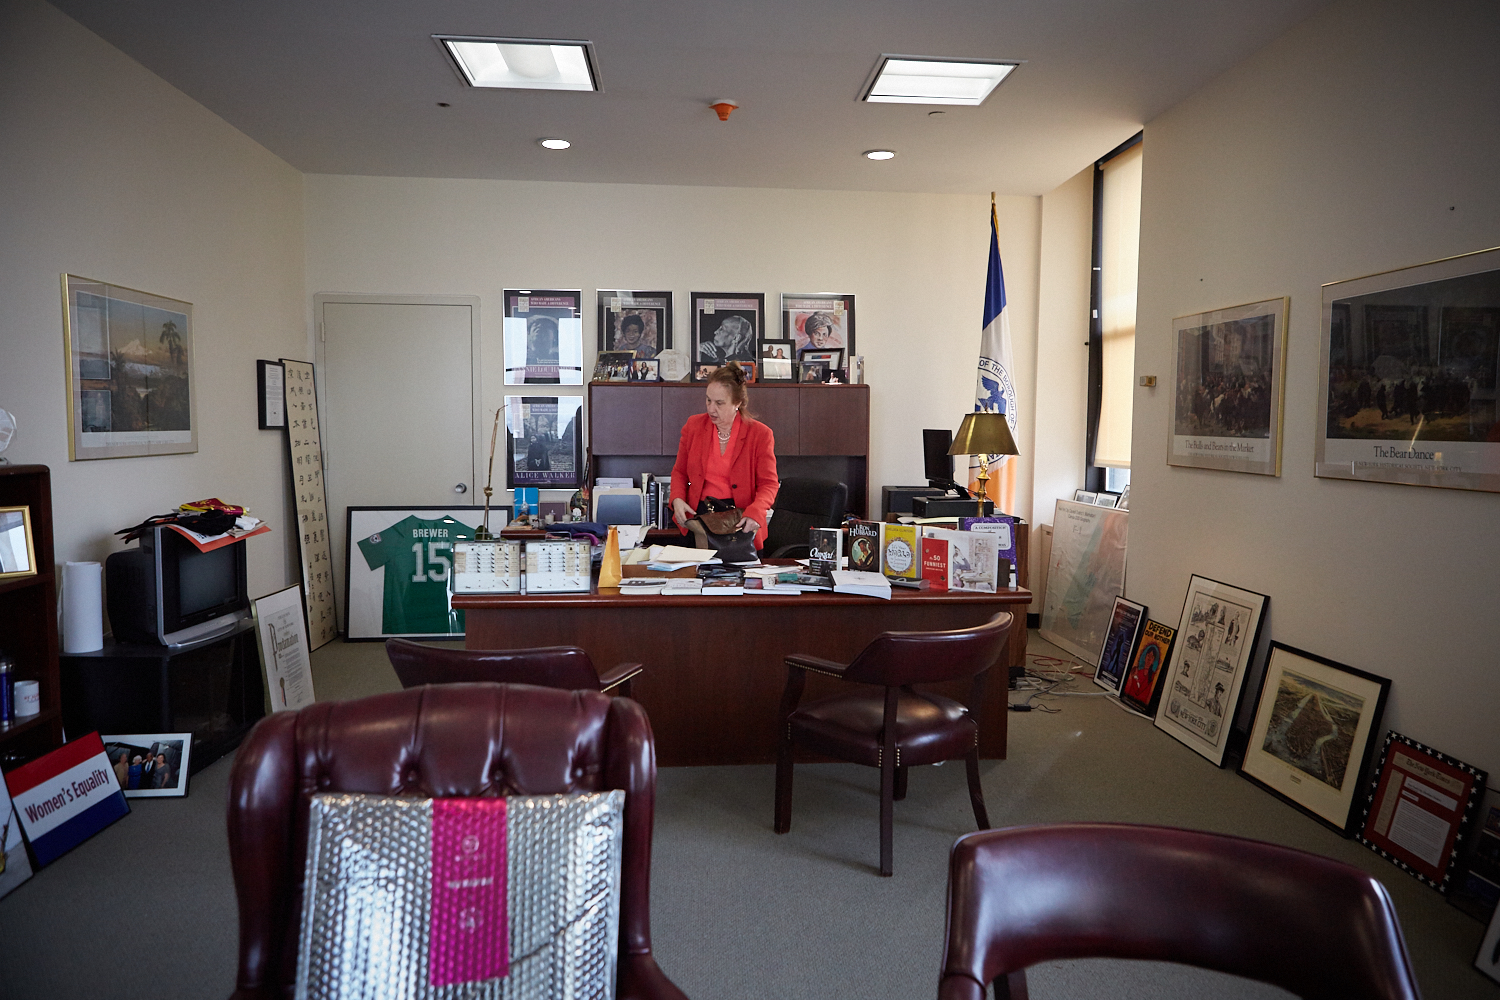 Gale Brewer in her office on the 19th floor of One Centre Street in downtown Manhattan.